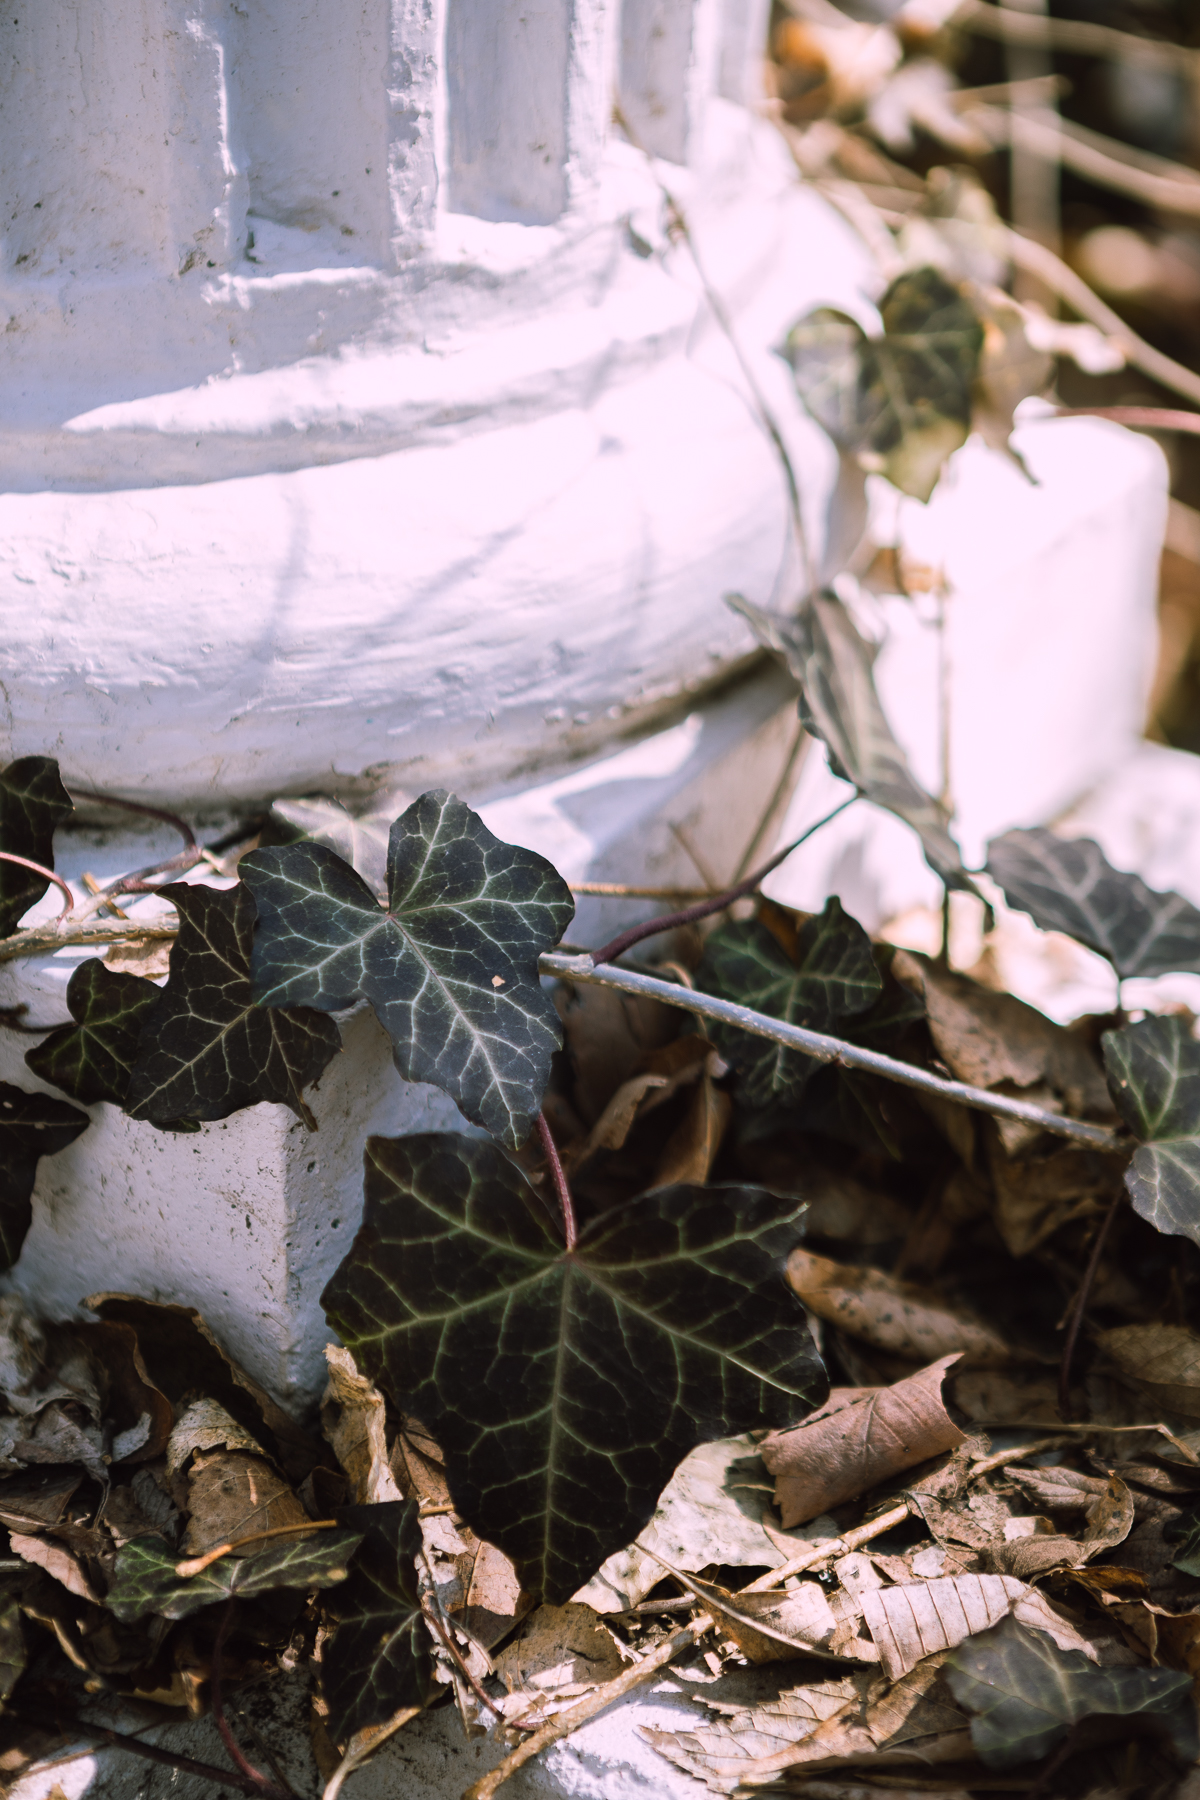 An image showing the base of a white-painted column. There are two parts to the base, one angular and rectangular, and on top, a rounded form. From the base rises the fluted column, covered in dark green vines and shriveled fallen leaves.